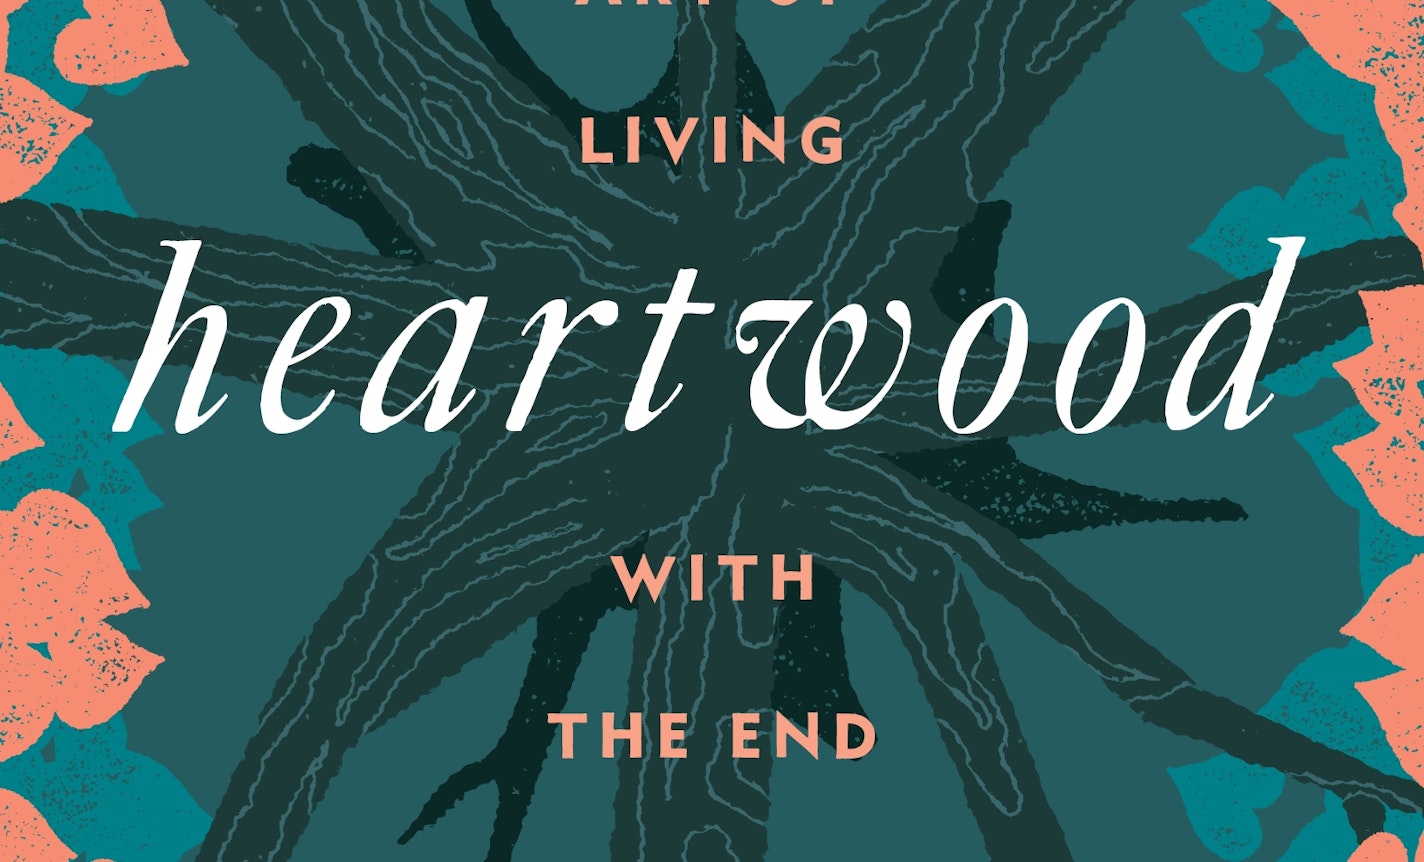 Heartwood: Evening on the Art of Living with the End in Mind